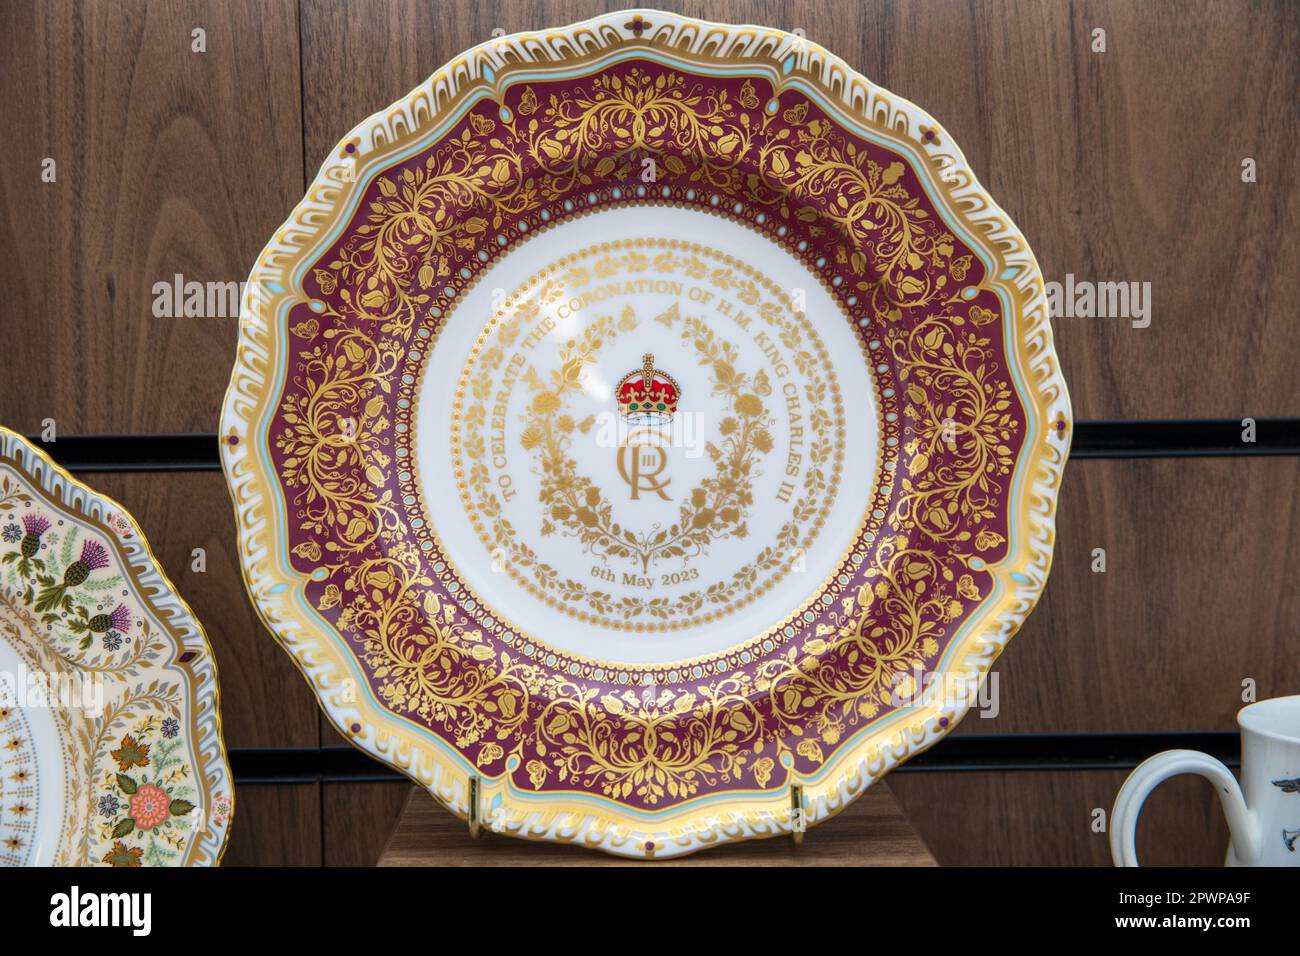 A plate made to honour the Coronation of Kings Charles III by the Royal Crown Derby. Stock Photo